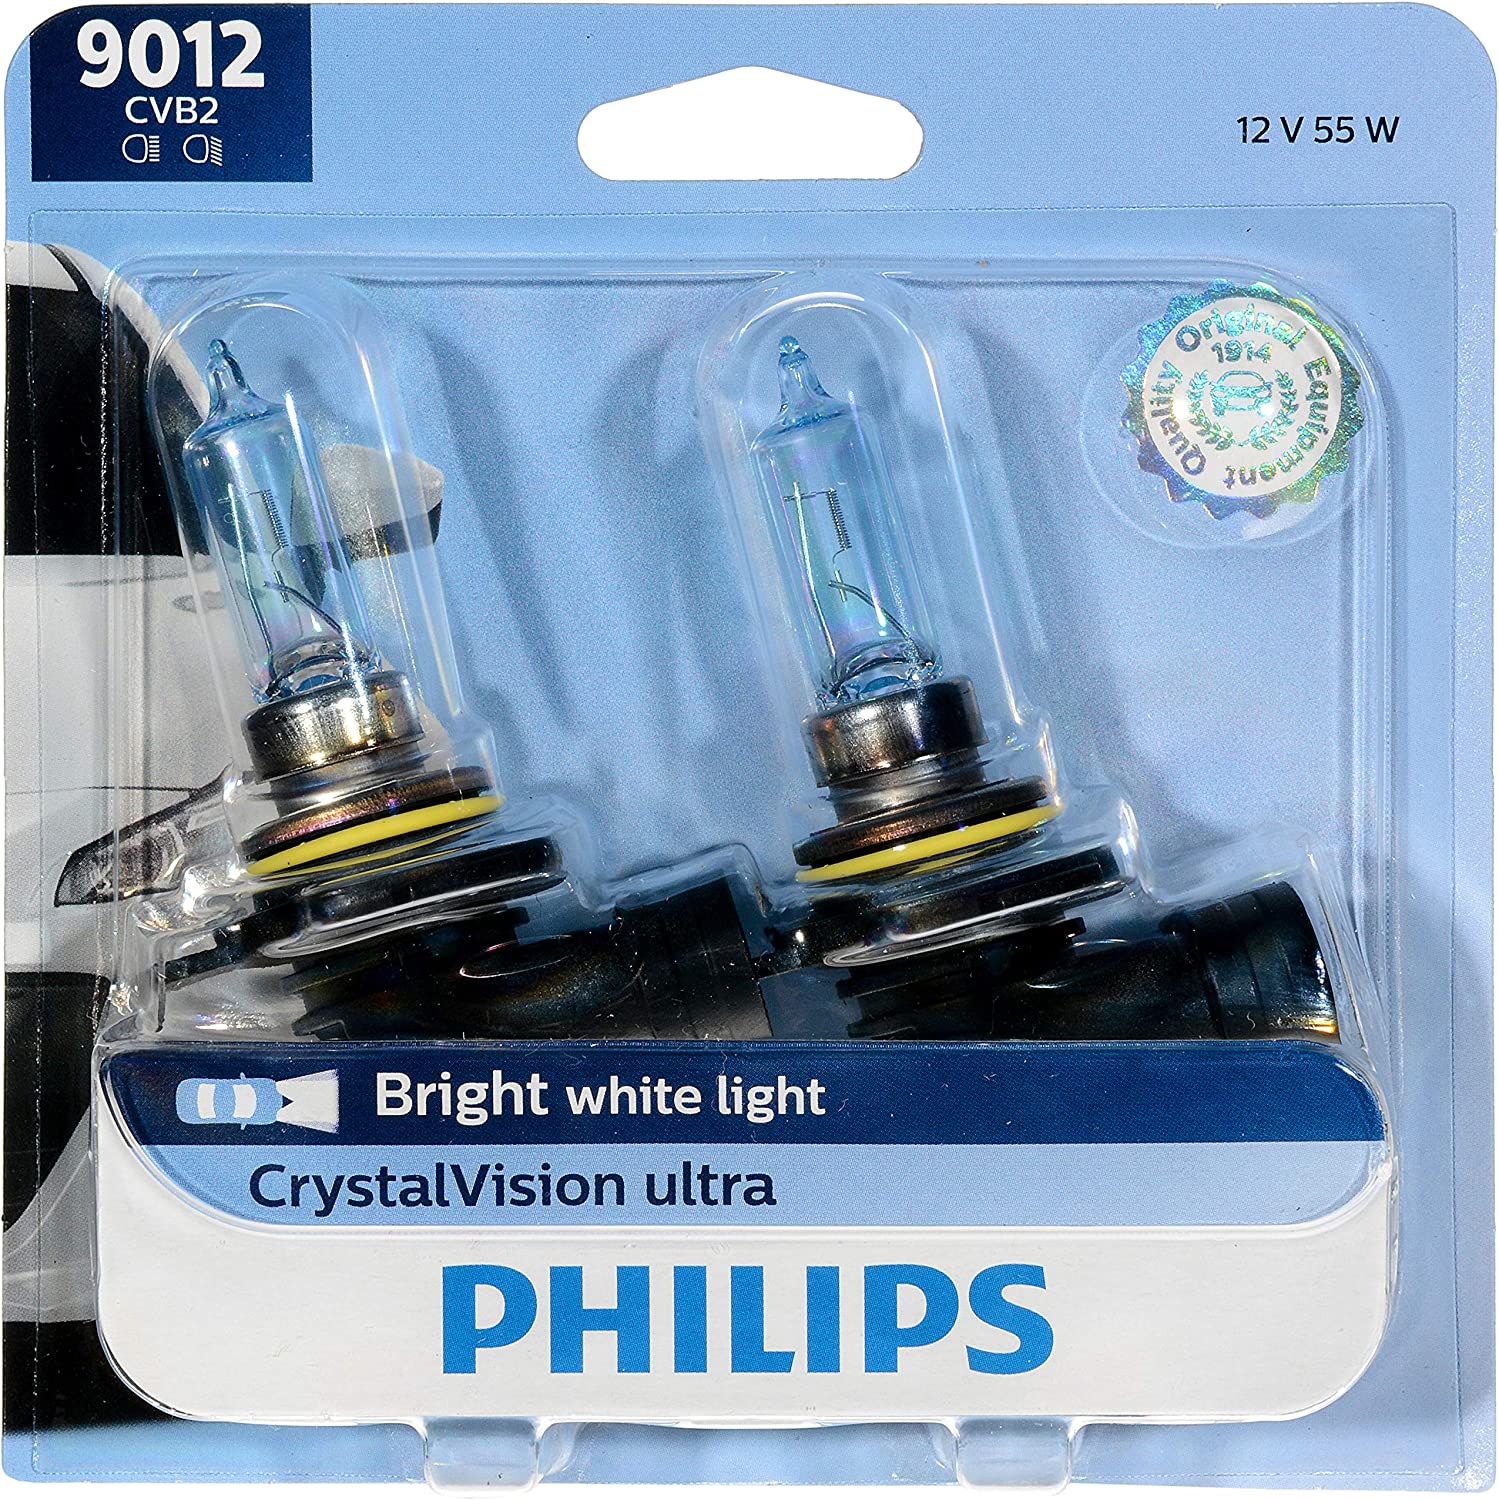 Image of Philips CrystalVision - one of the brightest halogen headlight bulbs